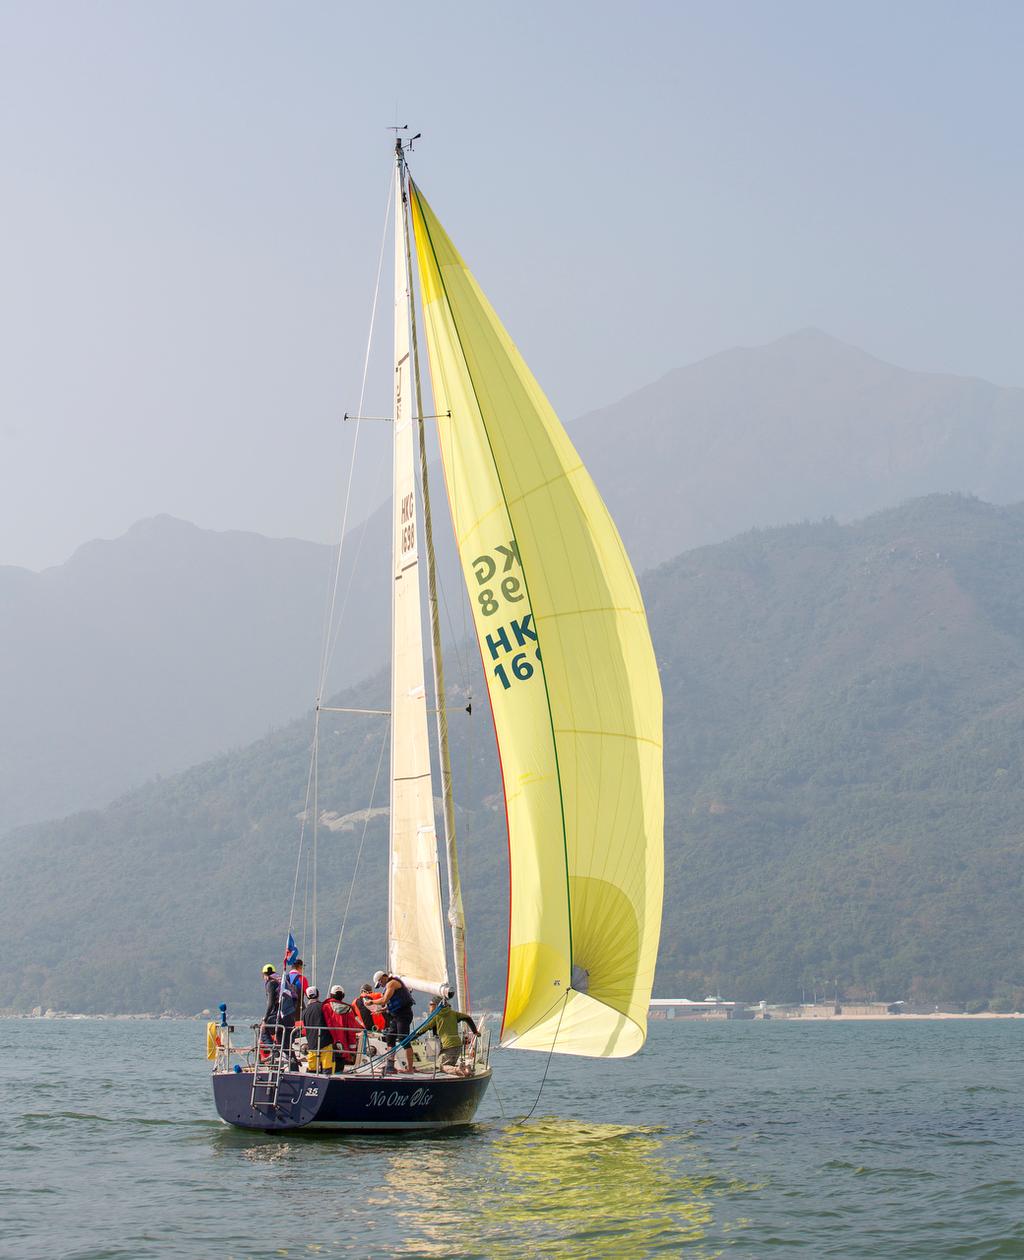 No One Else, first boat to arrive at Cheung Sha. Lantau Peak in the background. Beneteau Four Peaks Race 2017 © Guy Nowell / ABC